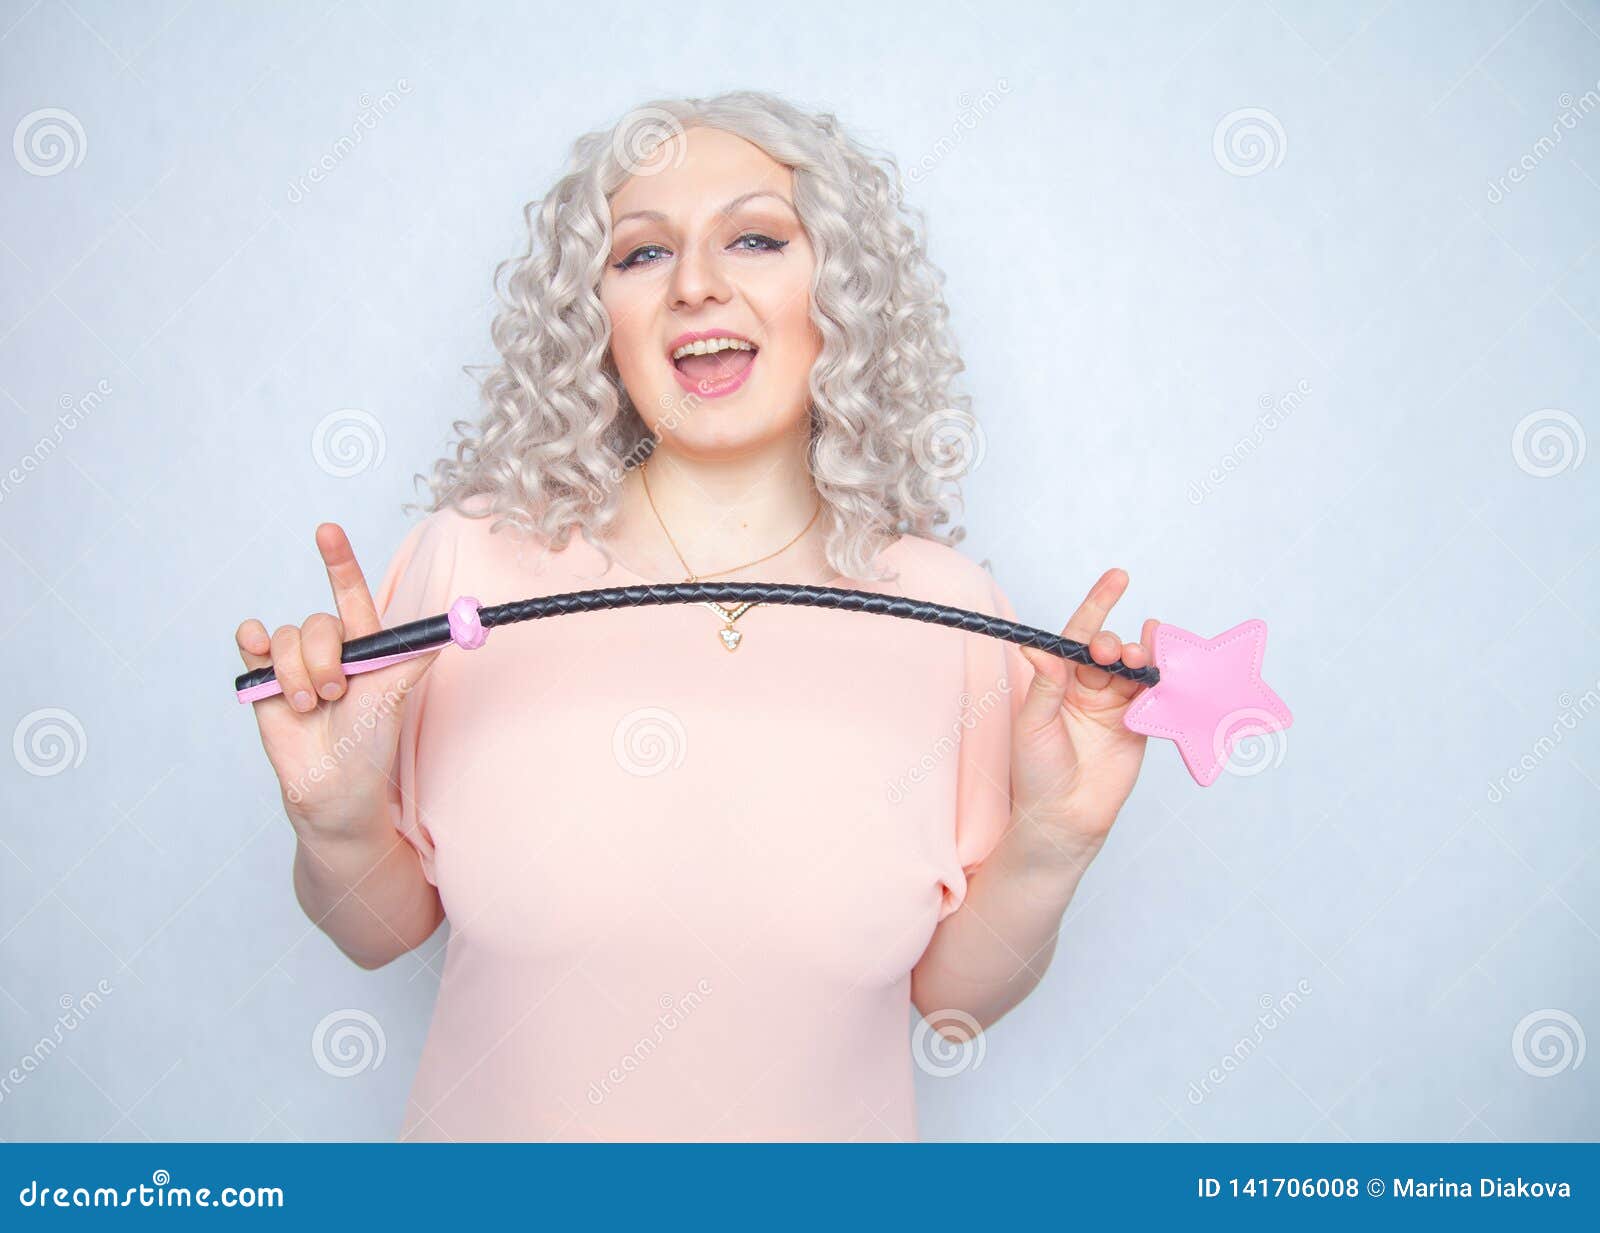 Kinky Pretty Woman with Pink Star Riding Crop pic